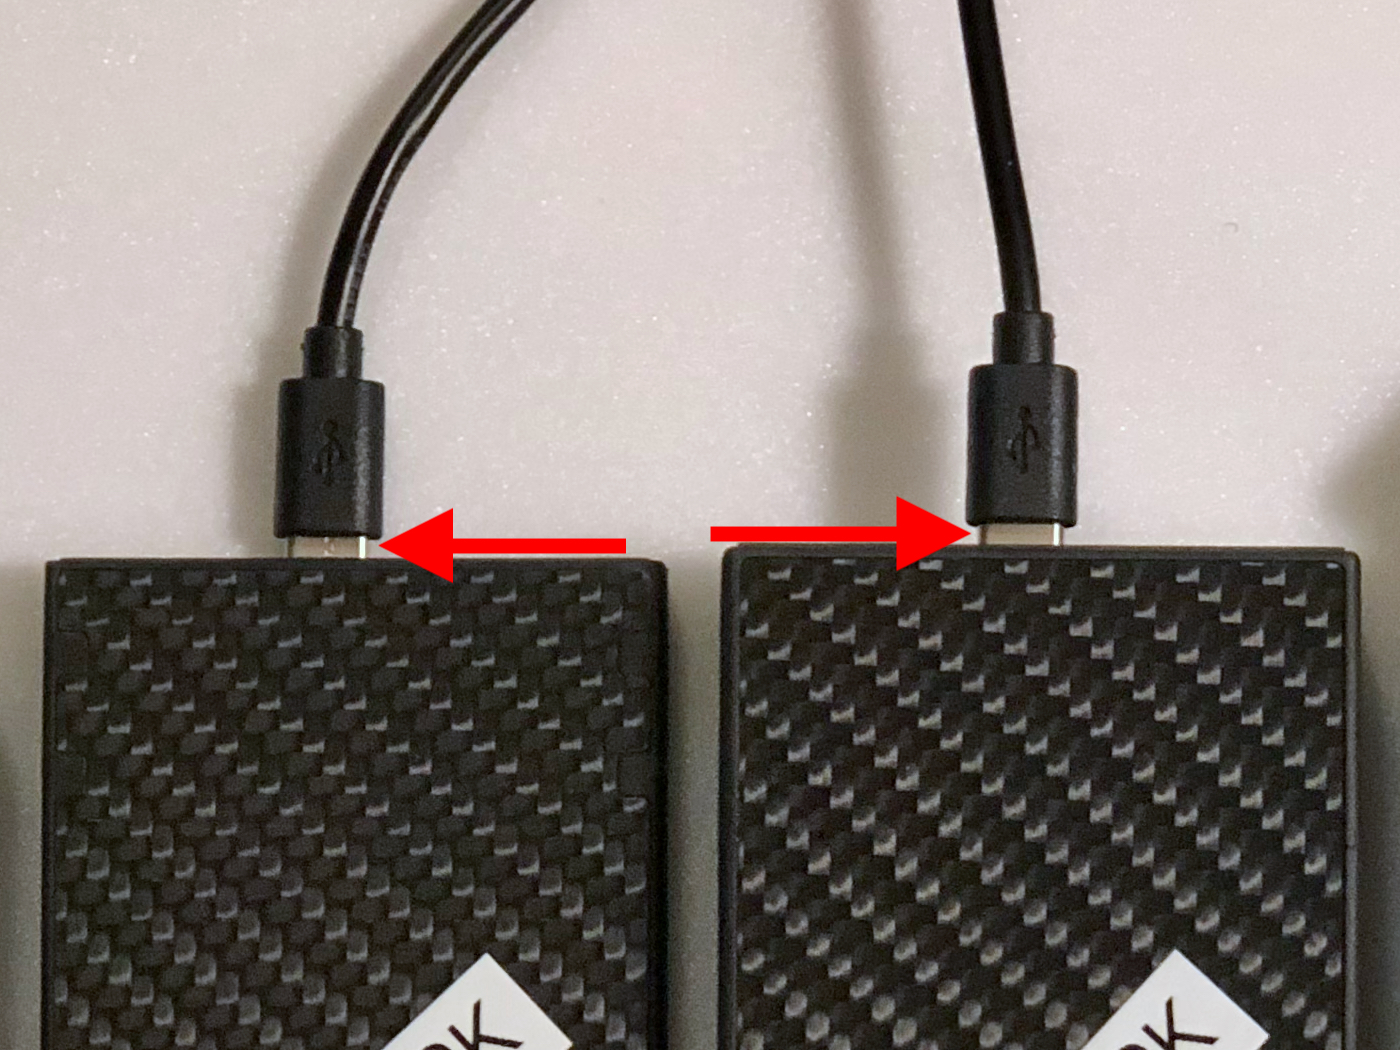 The Nitecore 10K (left) and Nitecore 20K PBCs with USB-C cables plugged in. Red arrows point to exposed connectors.